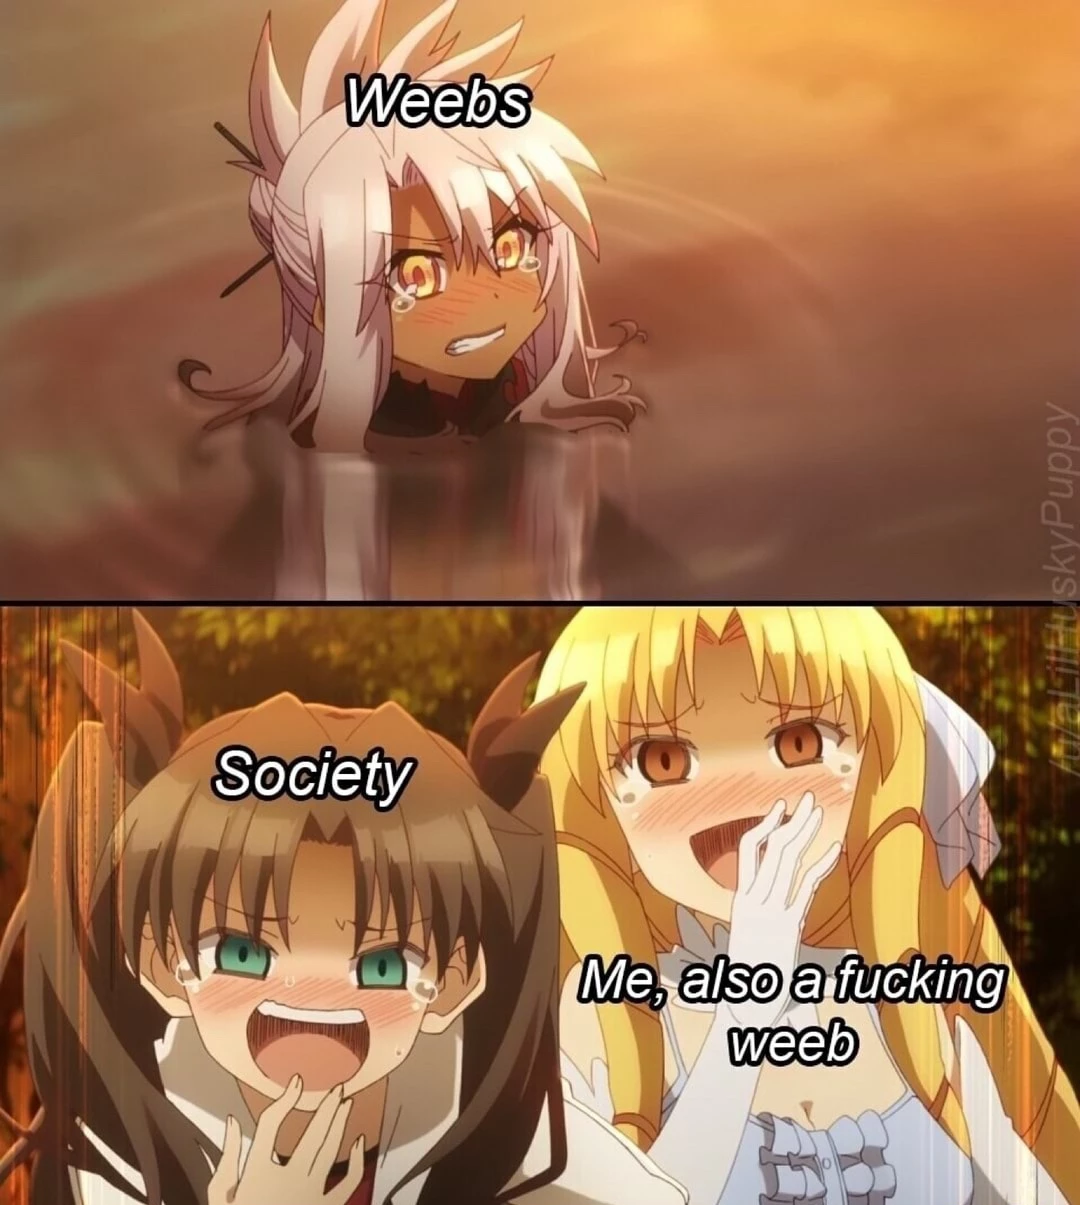 Only Weebs Have The Privilege To Mock Each Other’s Existence